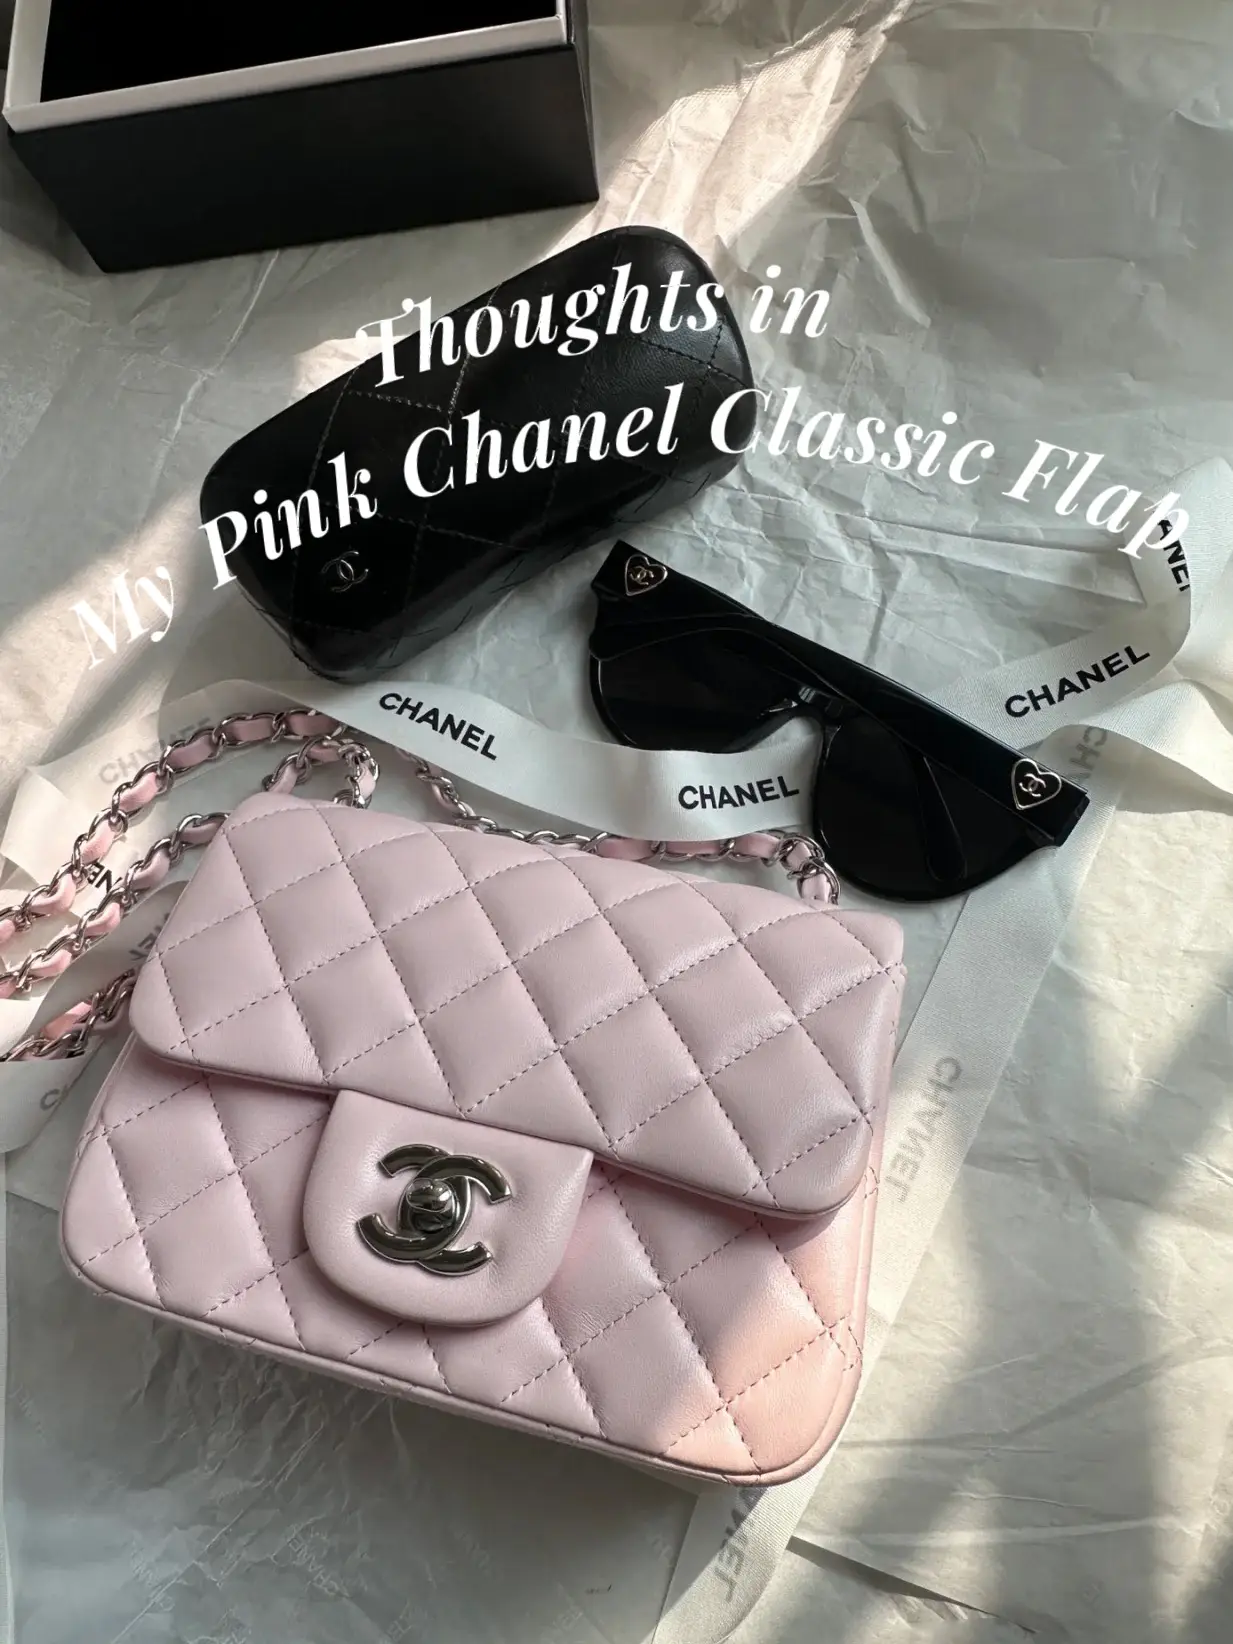 Thoughts in My Pink Chanel Classic Flap